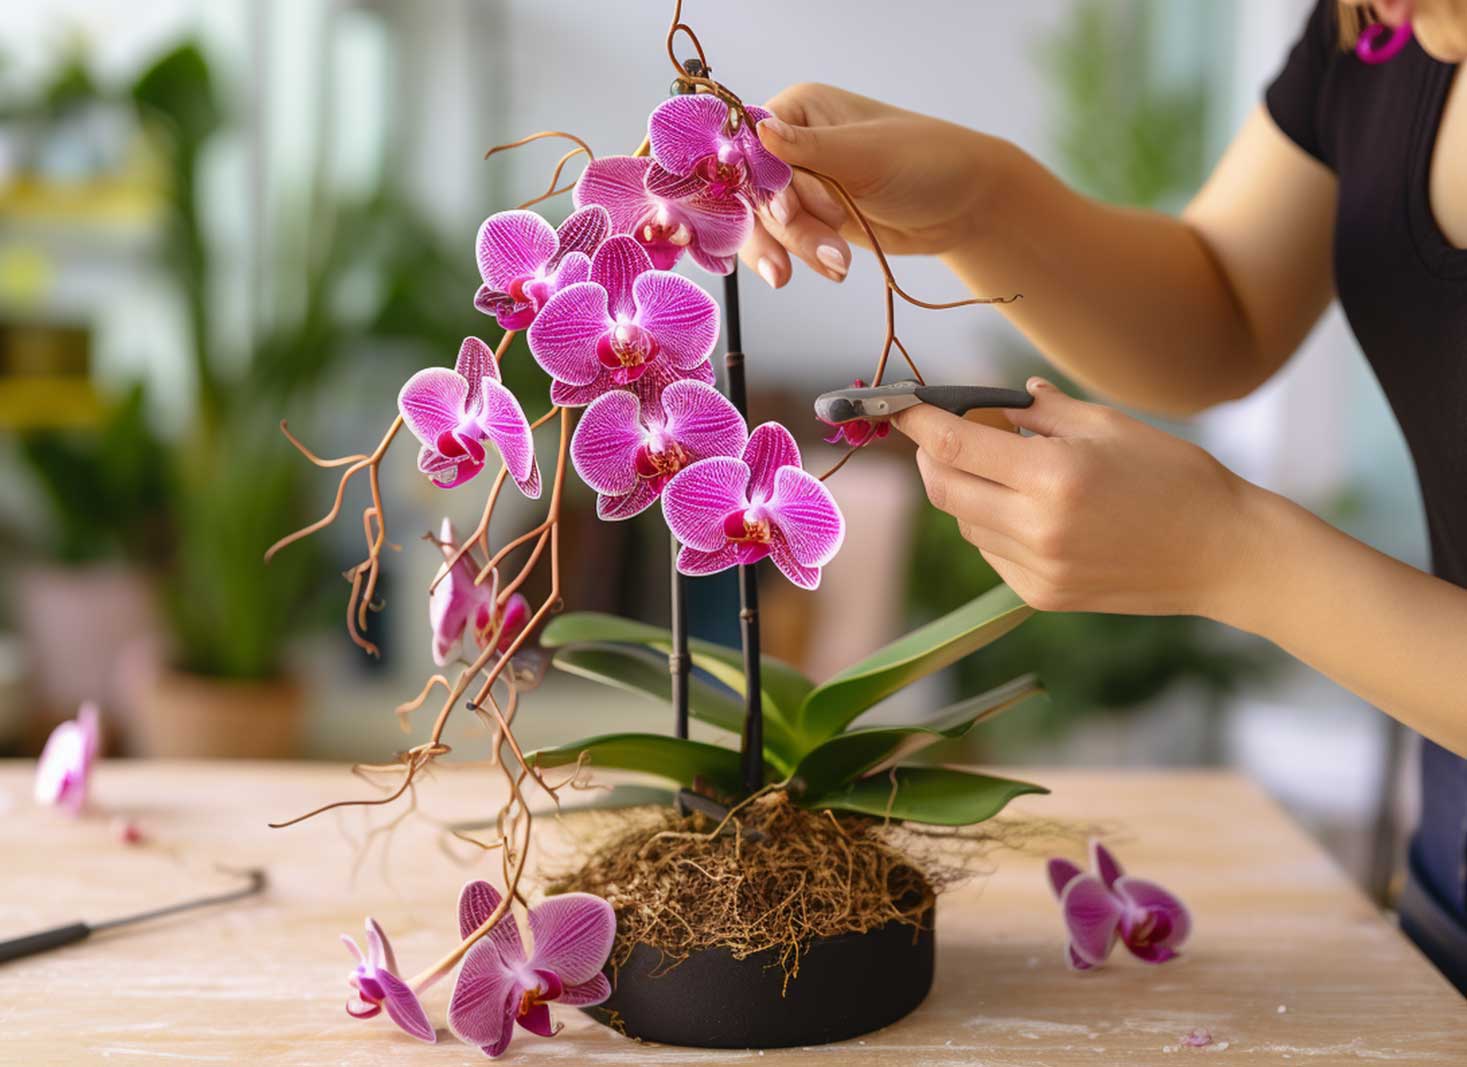 Pruning techniques for different orchid parts